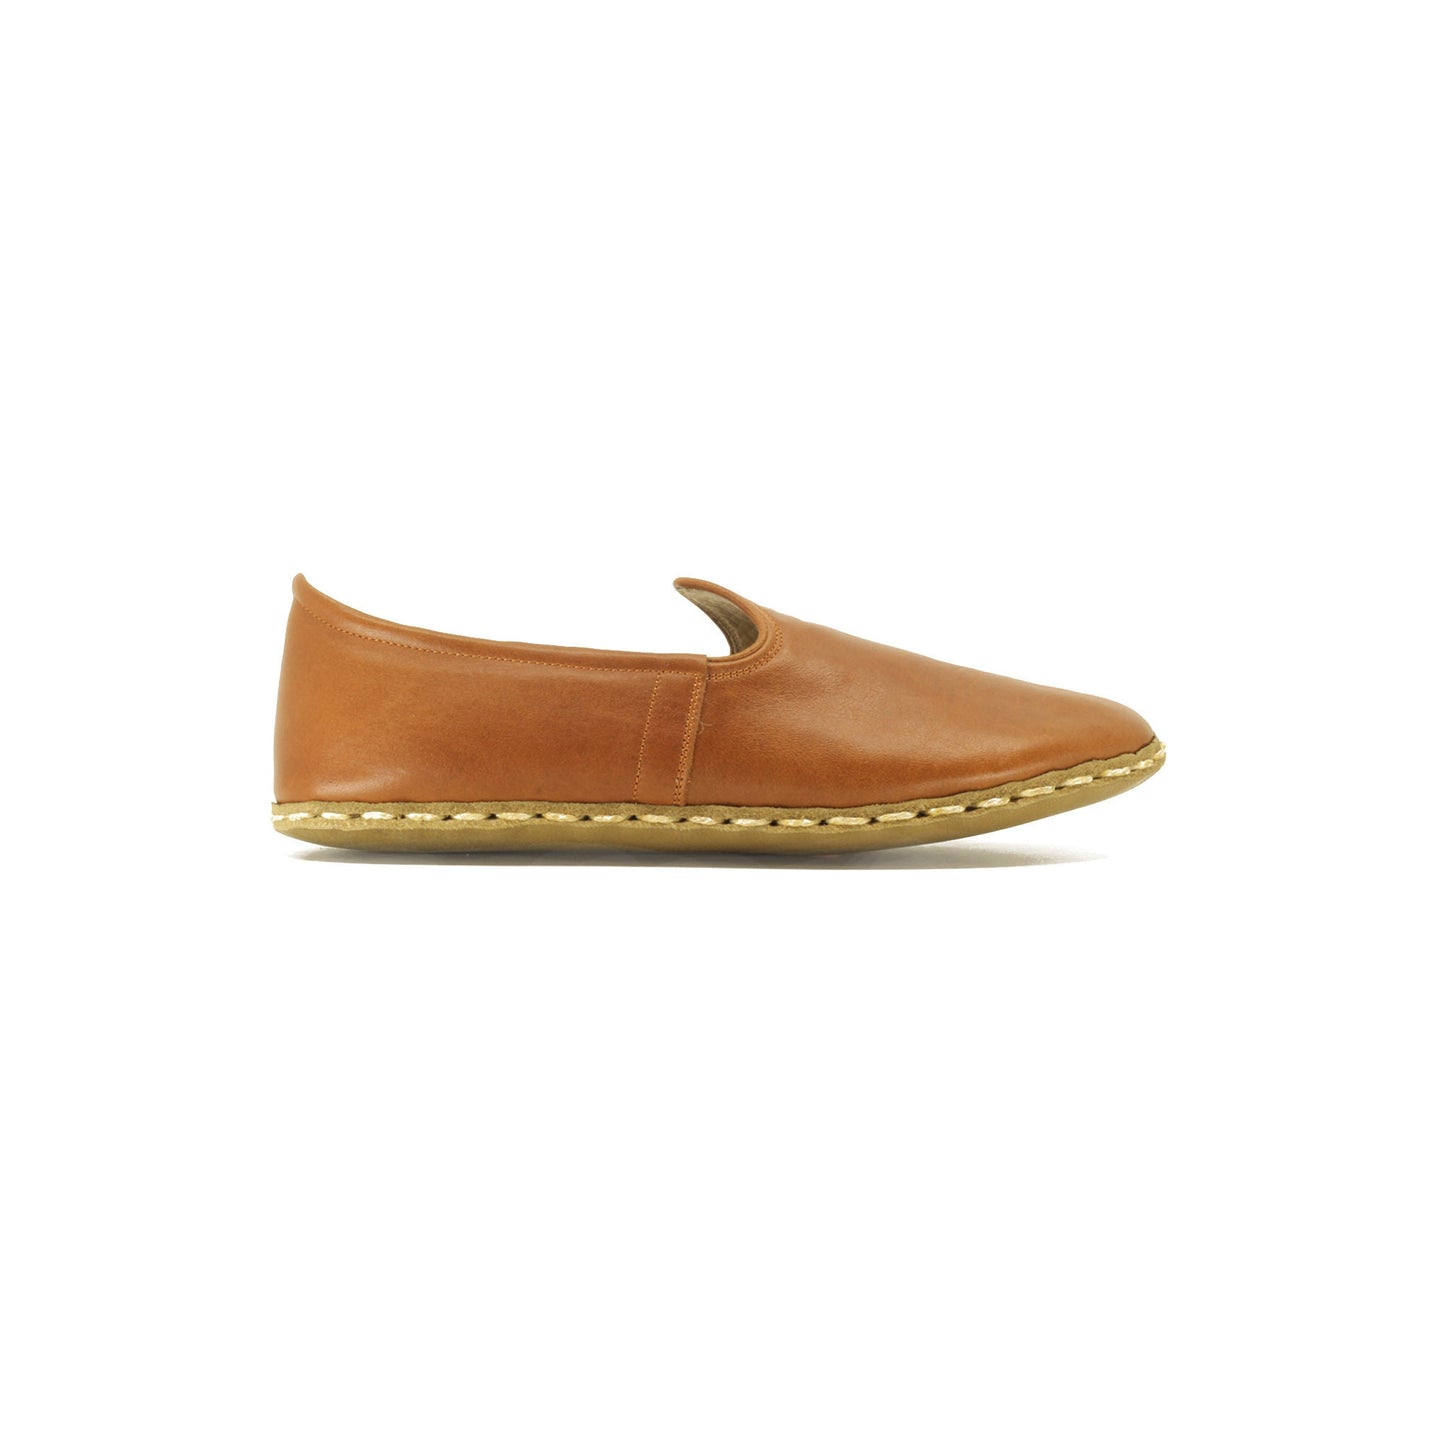 Brown Leather Barefoot Slip-On for Men - Zero Drop, Wide Toe Box